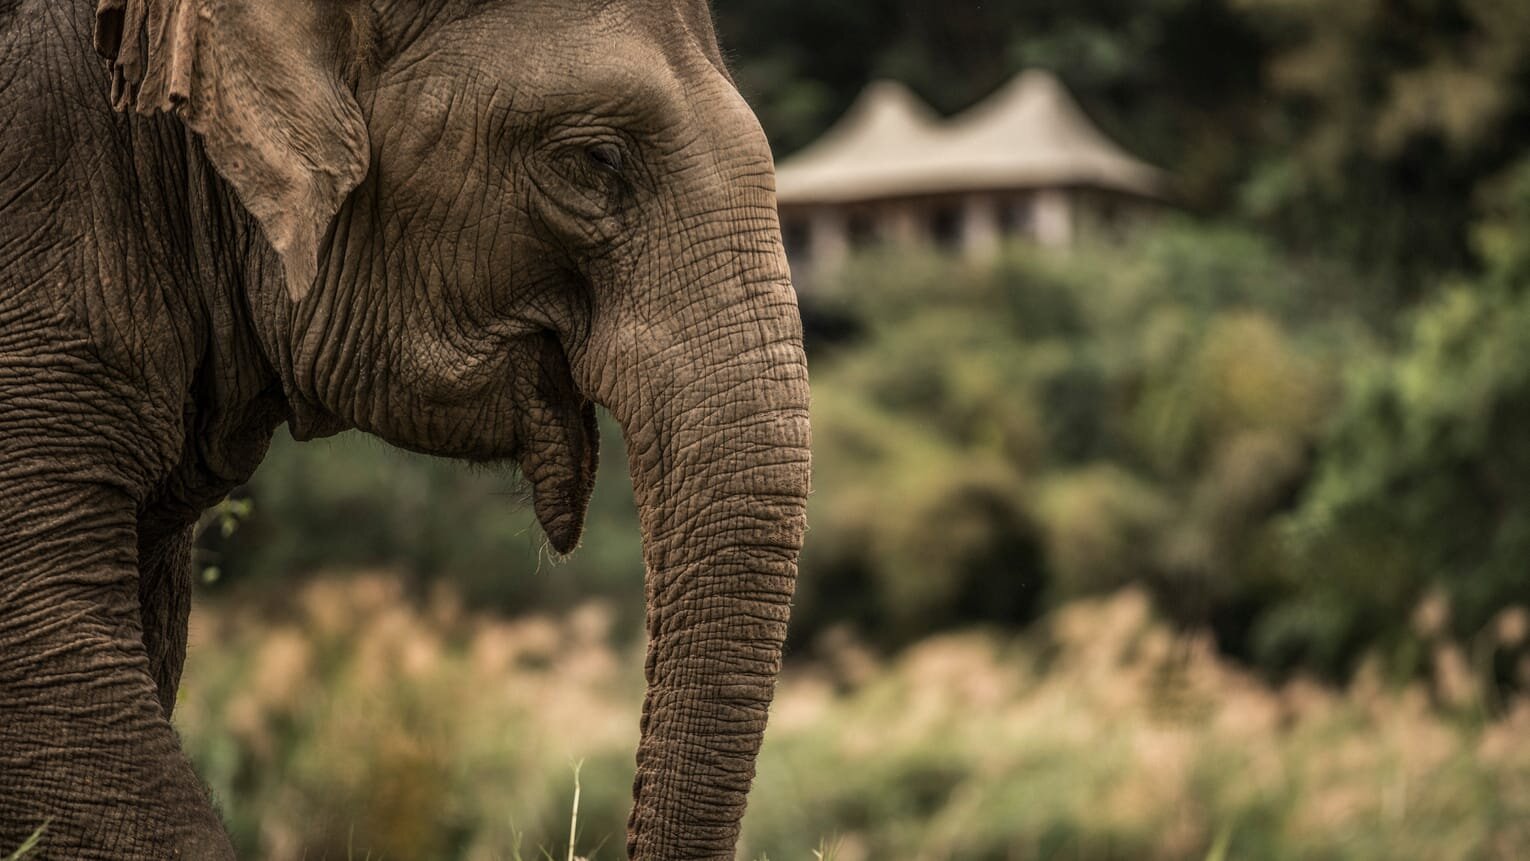 Get Up Close with Gentle Asian Elephants in Chiang Rai